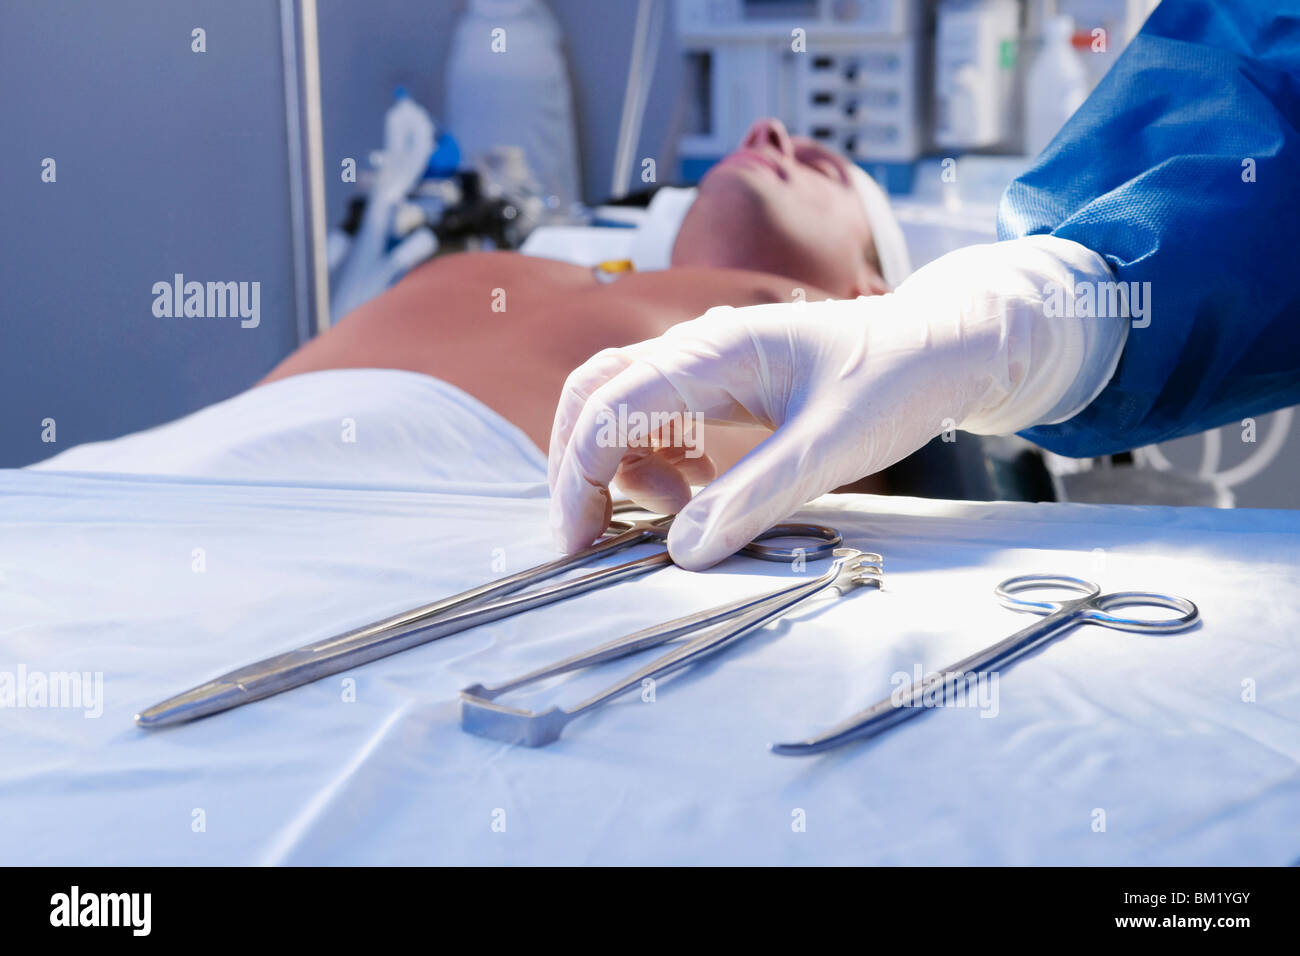 Surgeon holding surgical scissors in an operating room Stock Photo